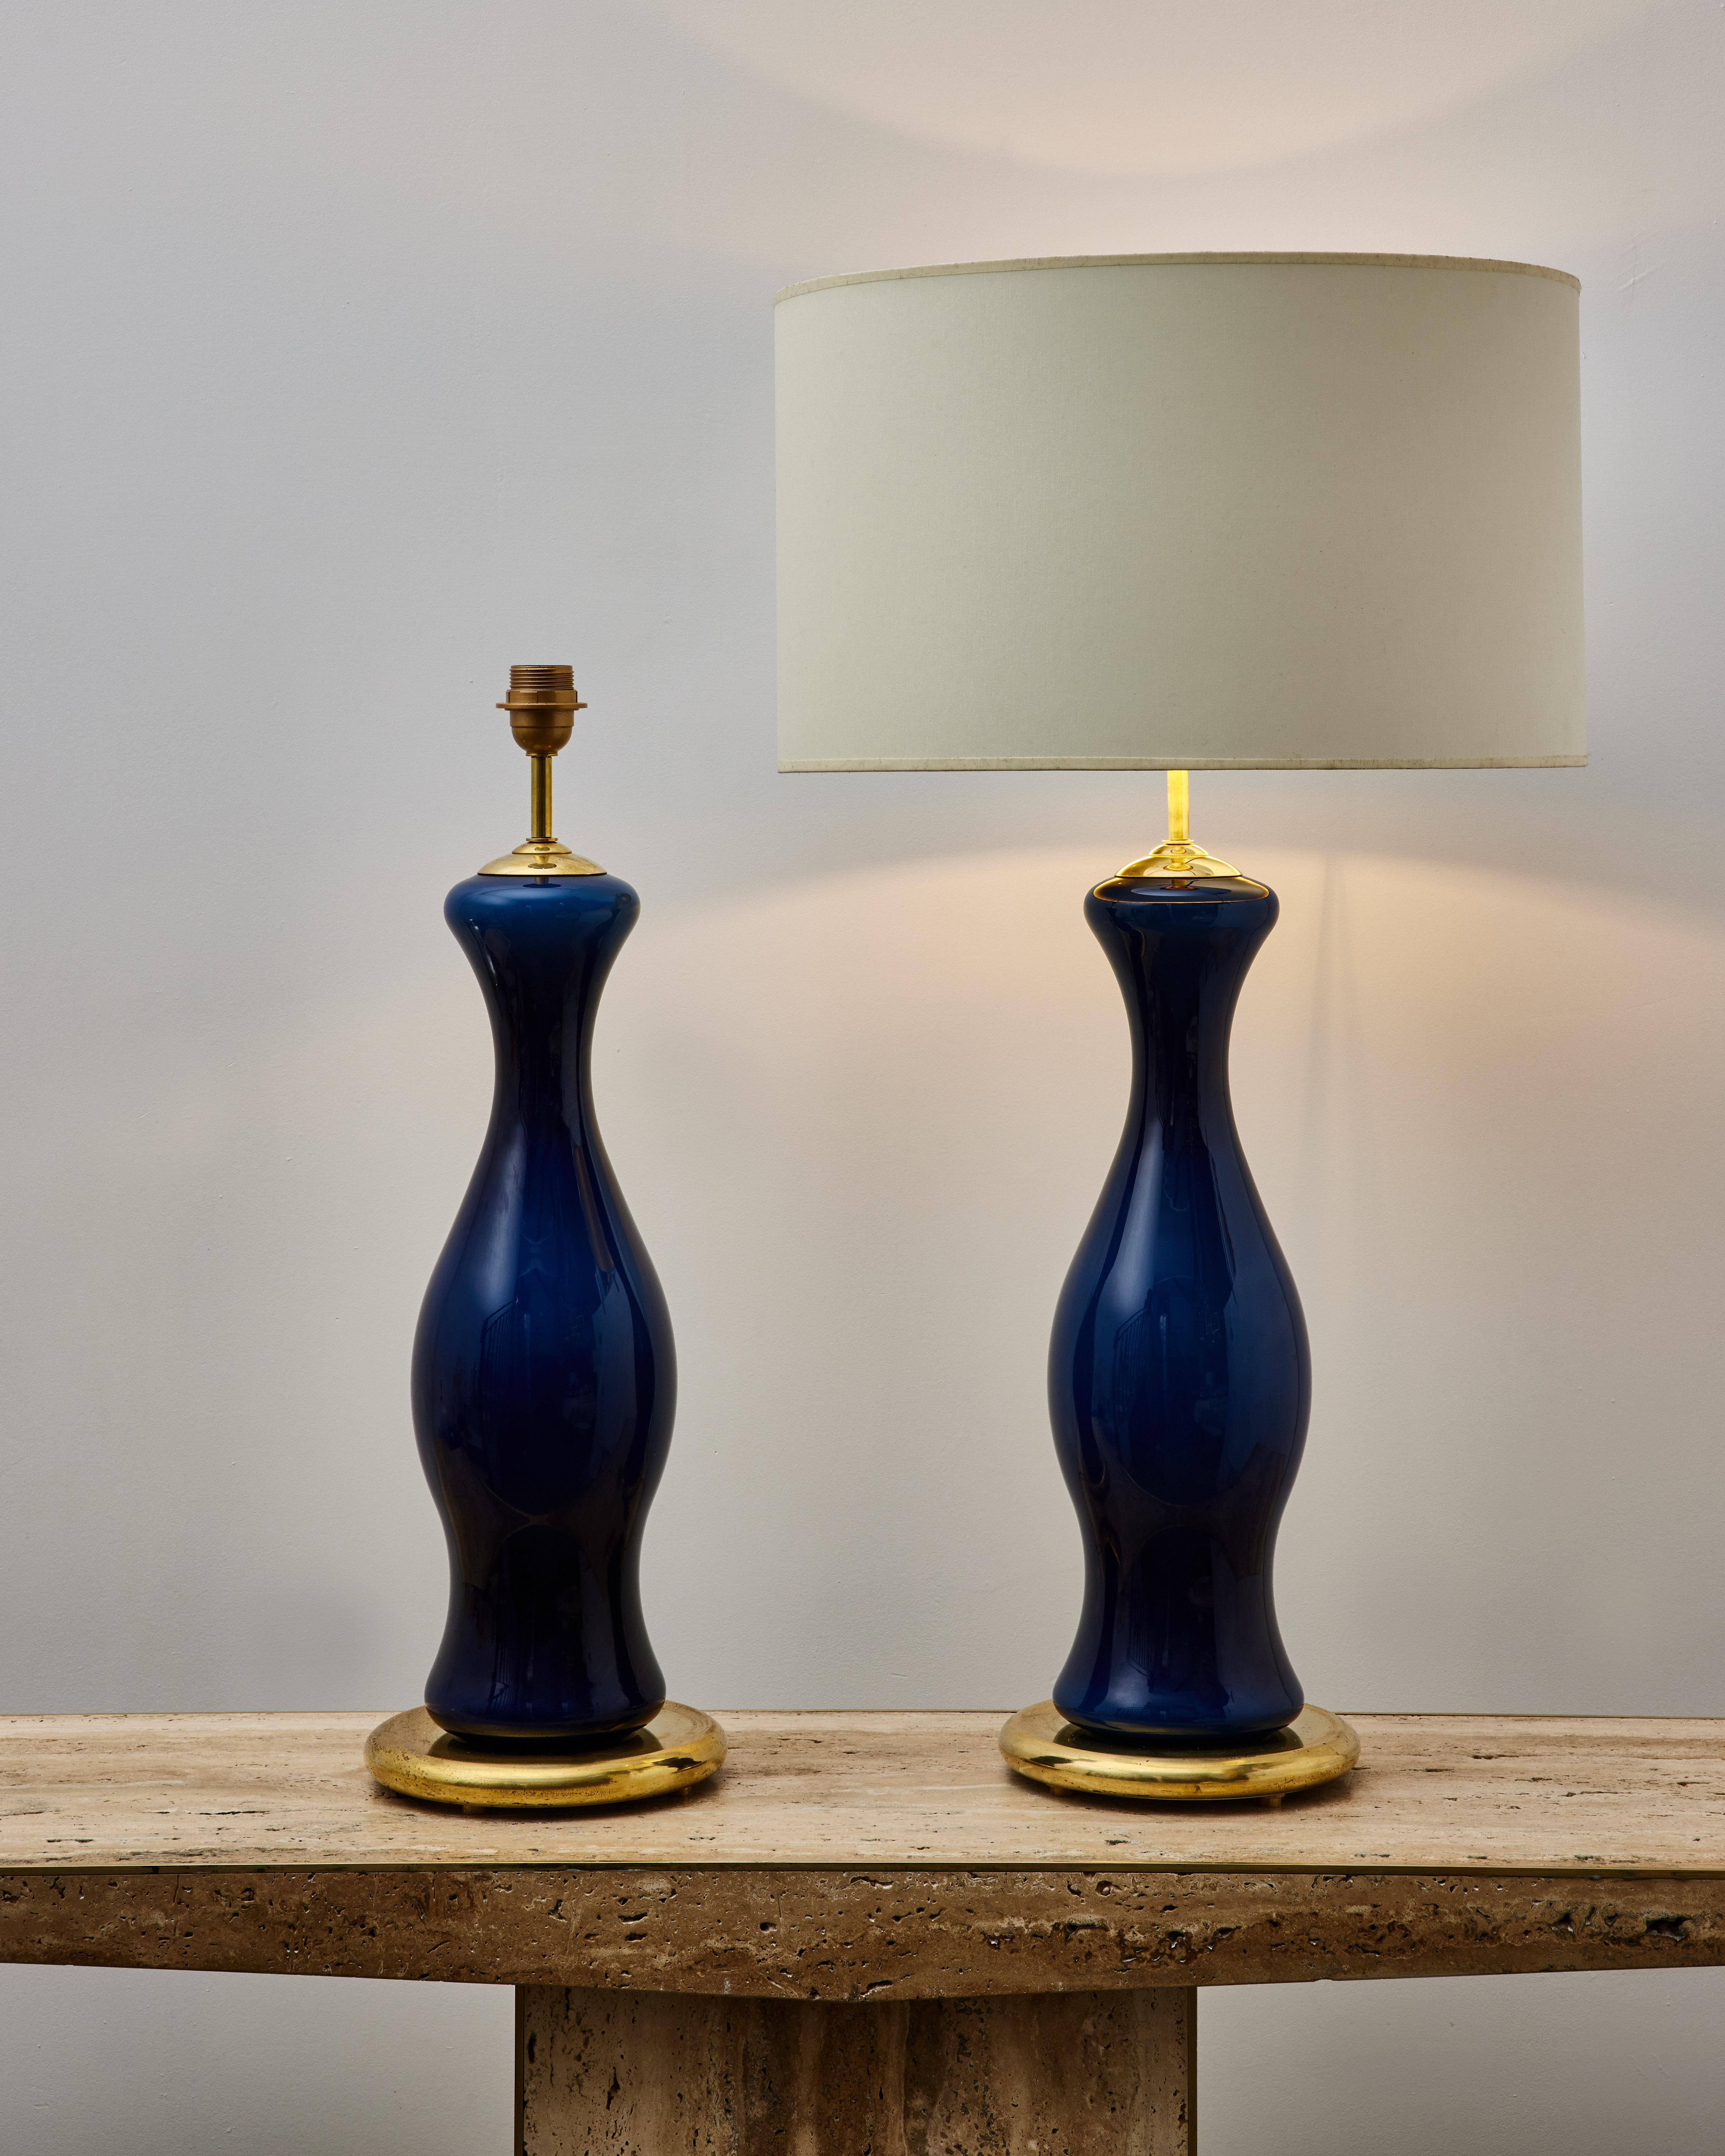 Super pair of vintage table lamps in blown and sculpted Murano glass and brass.
Rewired.
Italy, 1980s

Price and dimensions without shades.